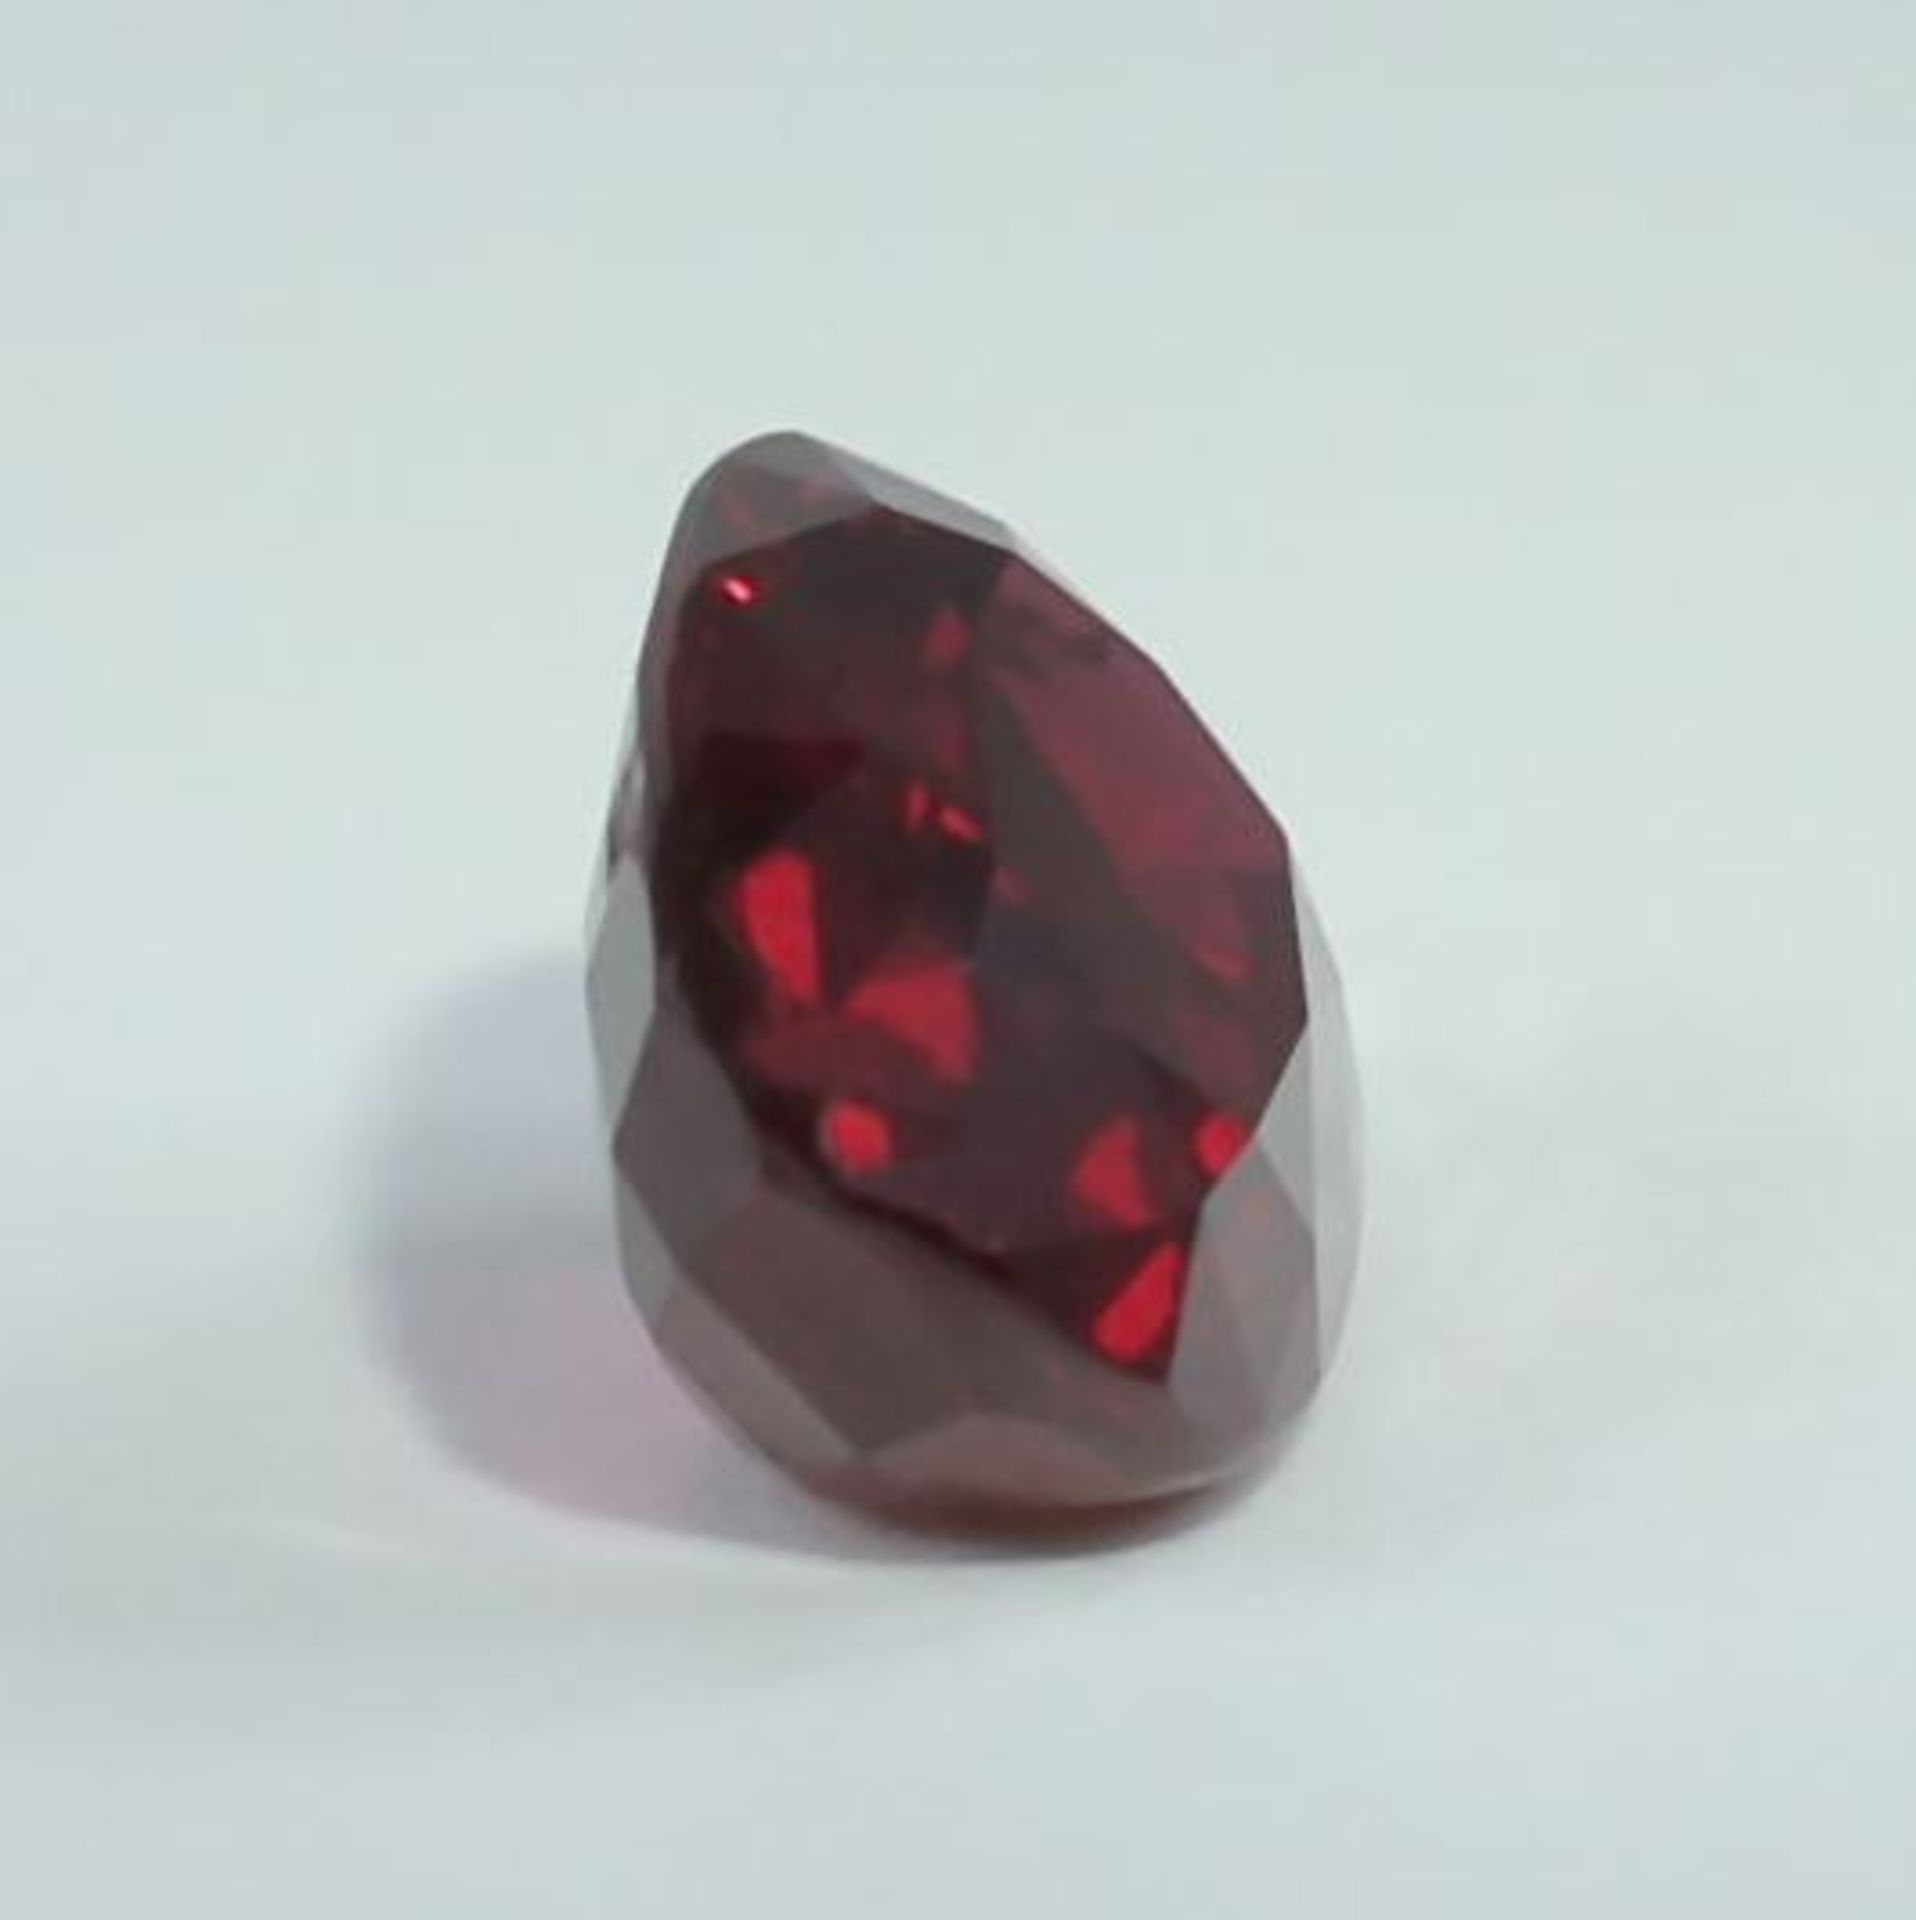 GRS Certified 5.02 ct. “Pigeon Blood” Ruby - Image 6 of 10